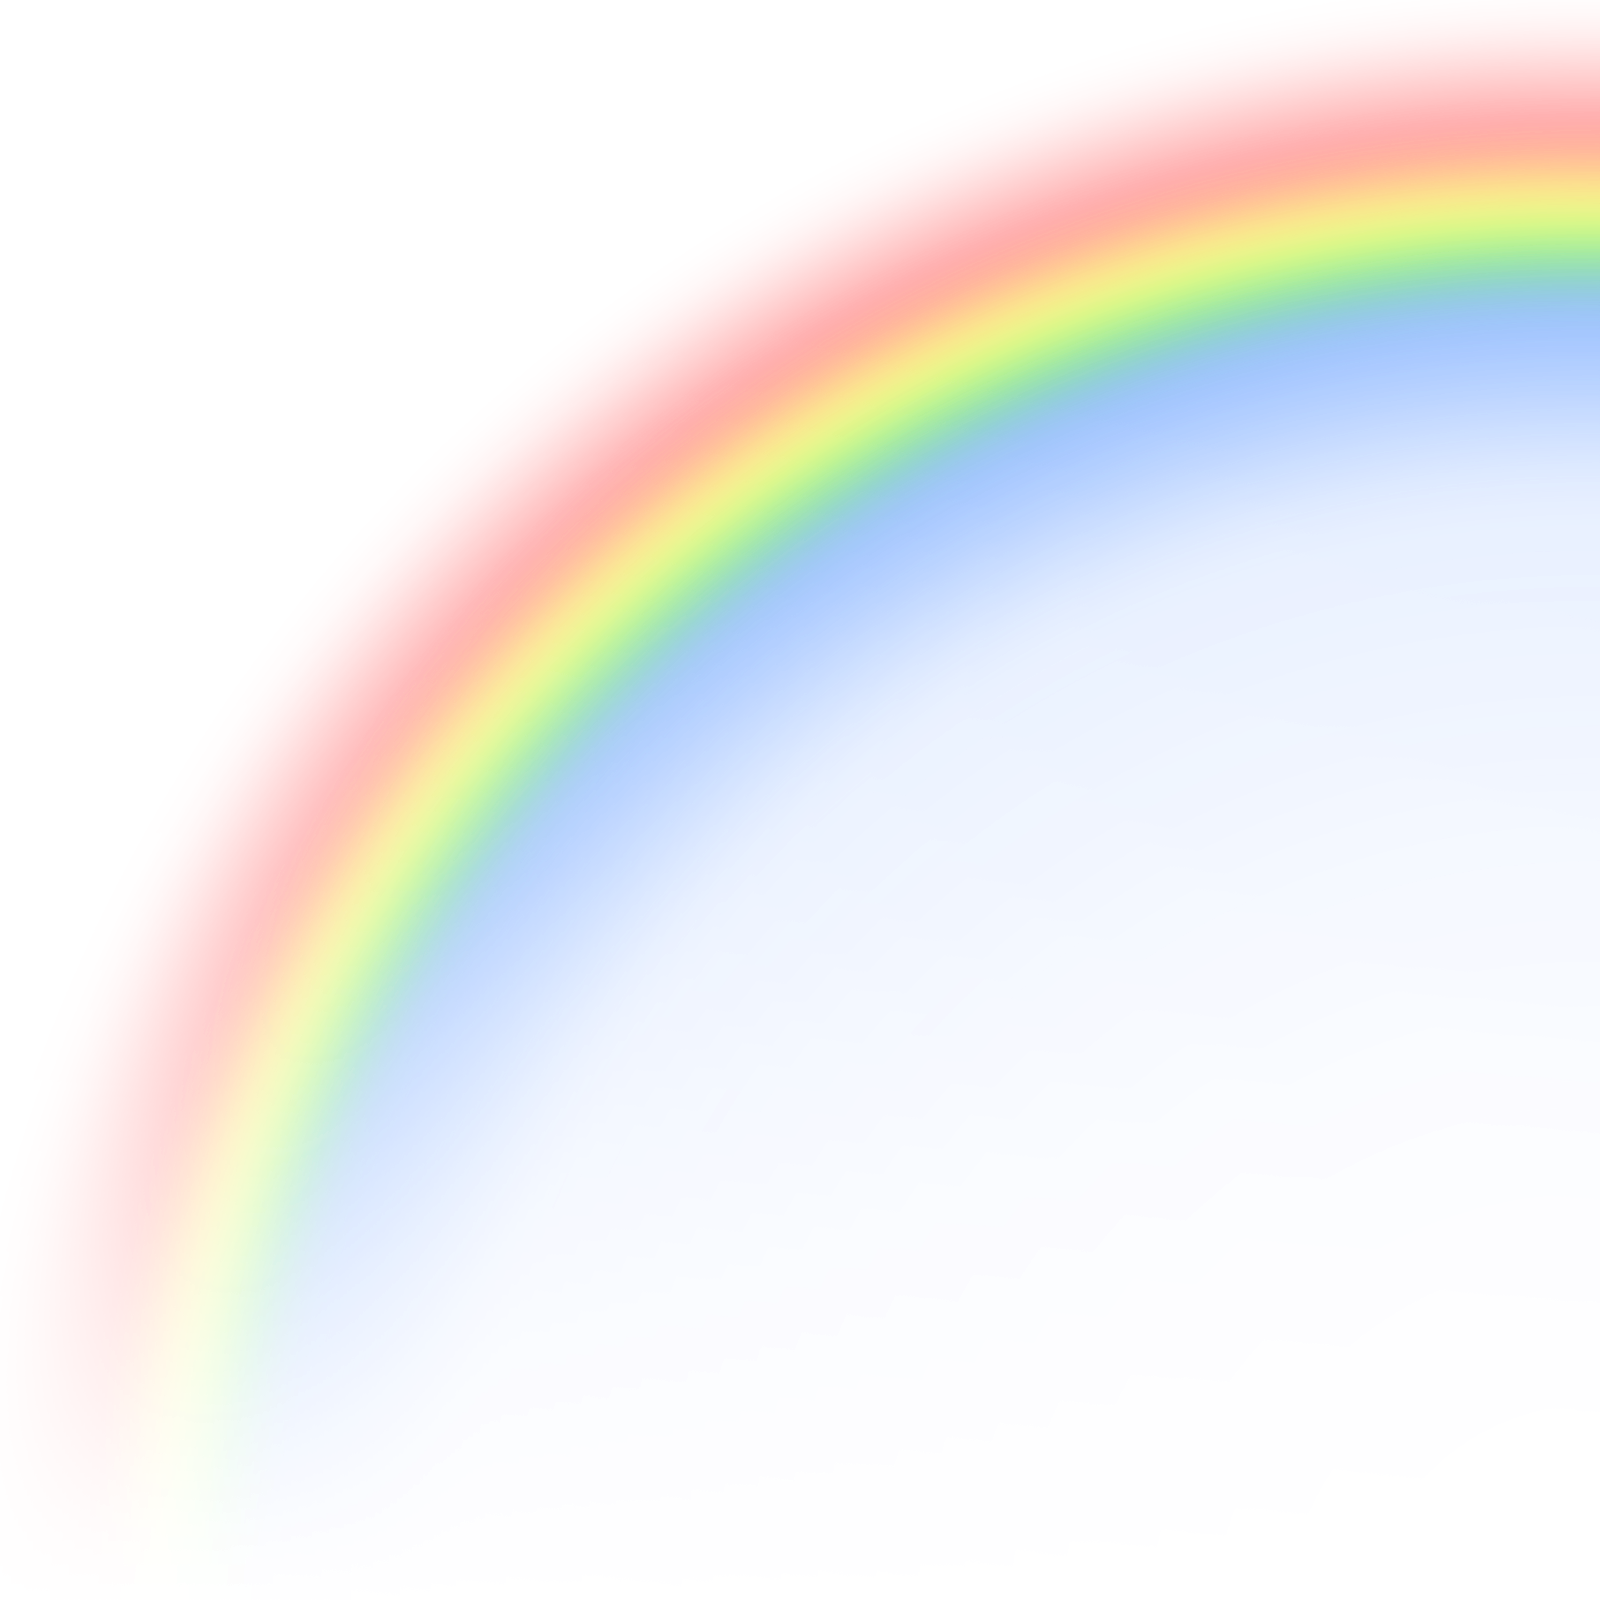 Rainbow Artist Computer Trading Cards Software PNG Image